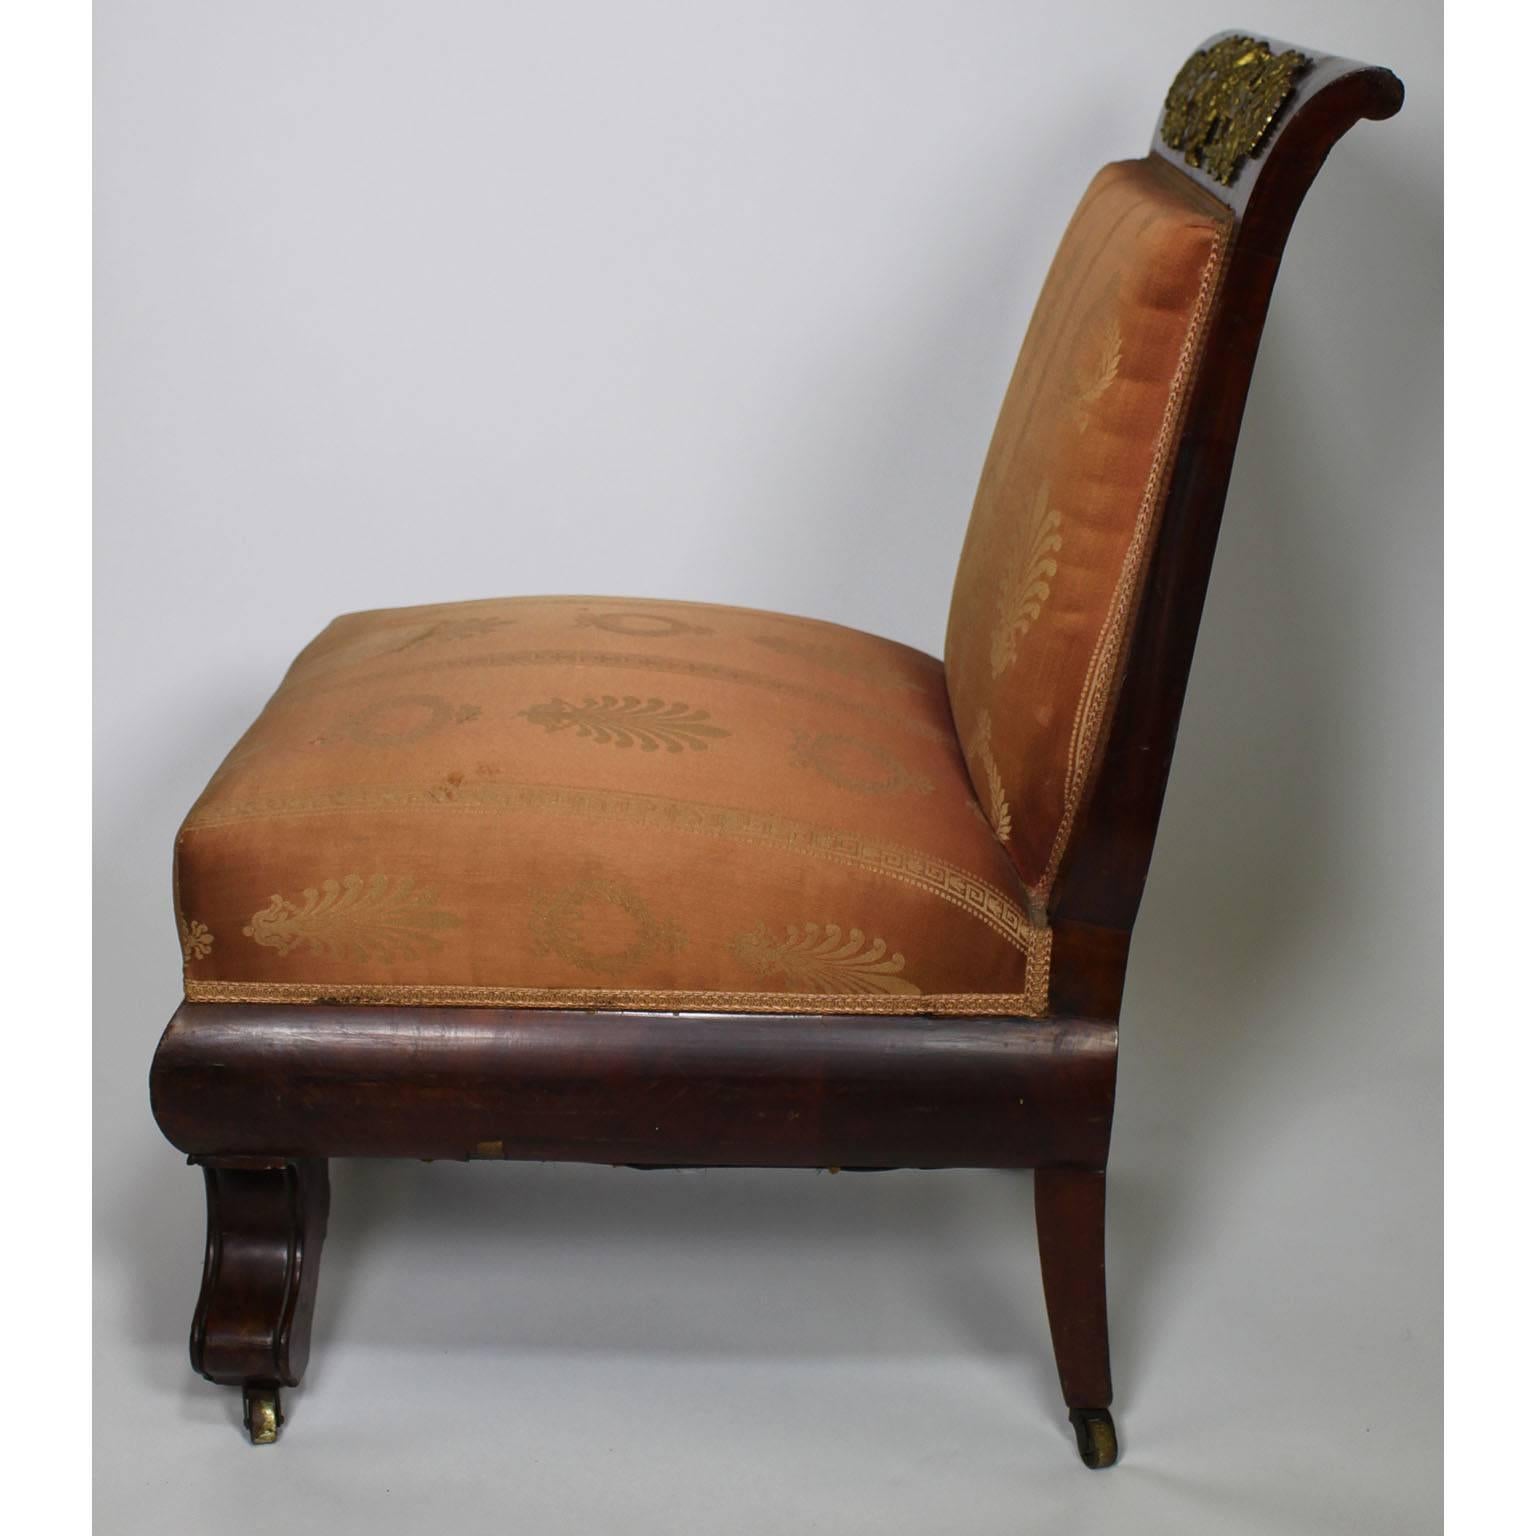 19th Century French Napoleon III Empire Mahogany and Ormolu-Mounted Low Chair, after Thomire